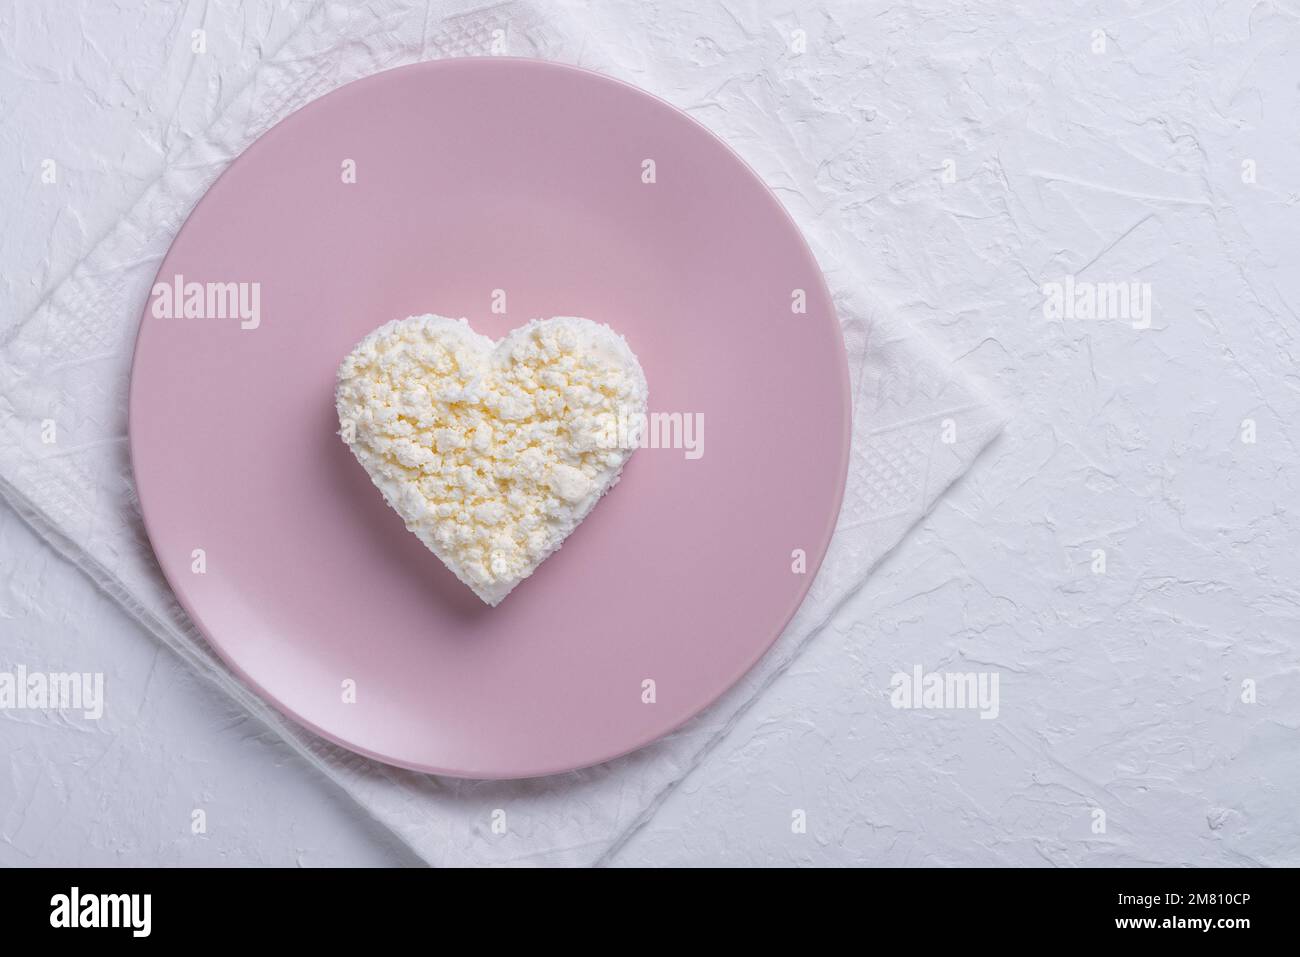 Heart shaped cottage cheese in a pink plate on a white table. Copy space for text Stock Photo